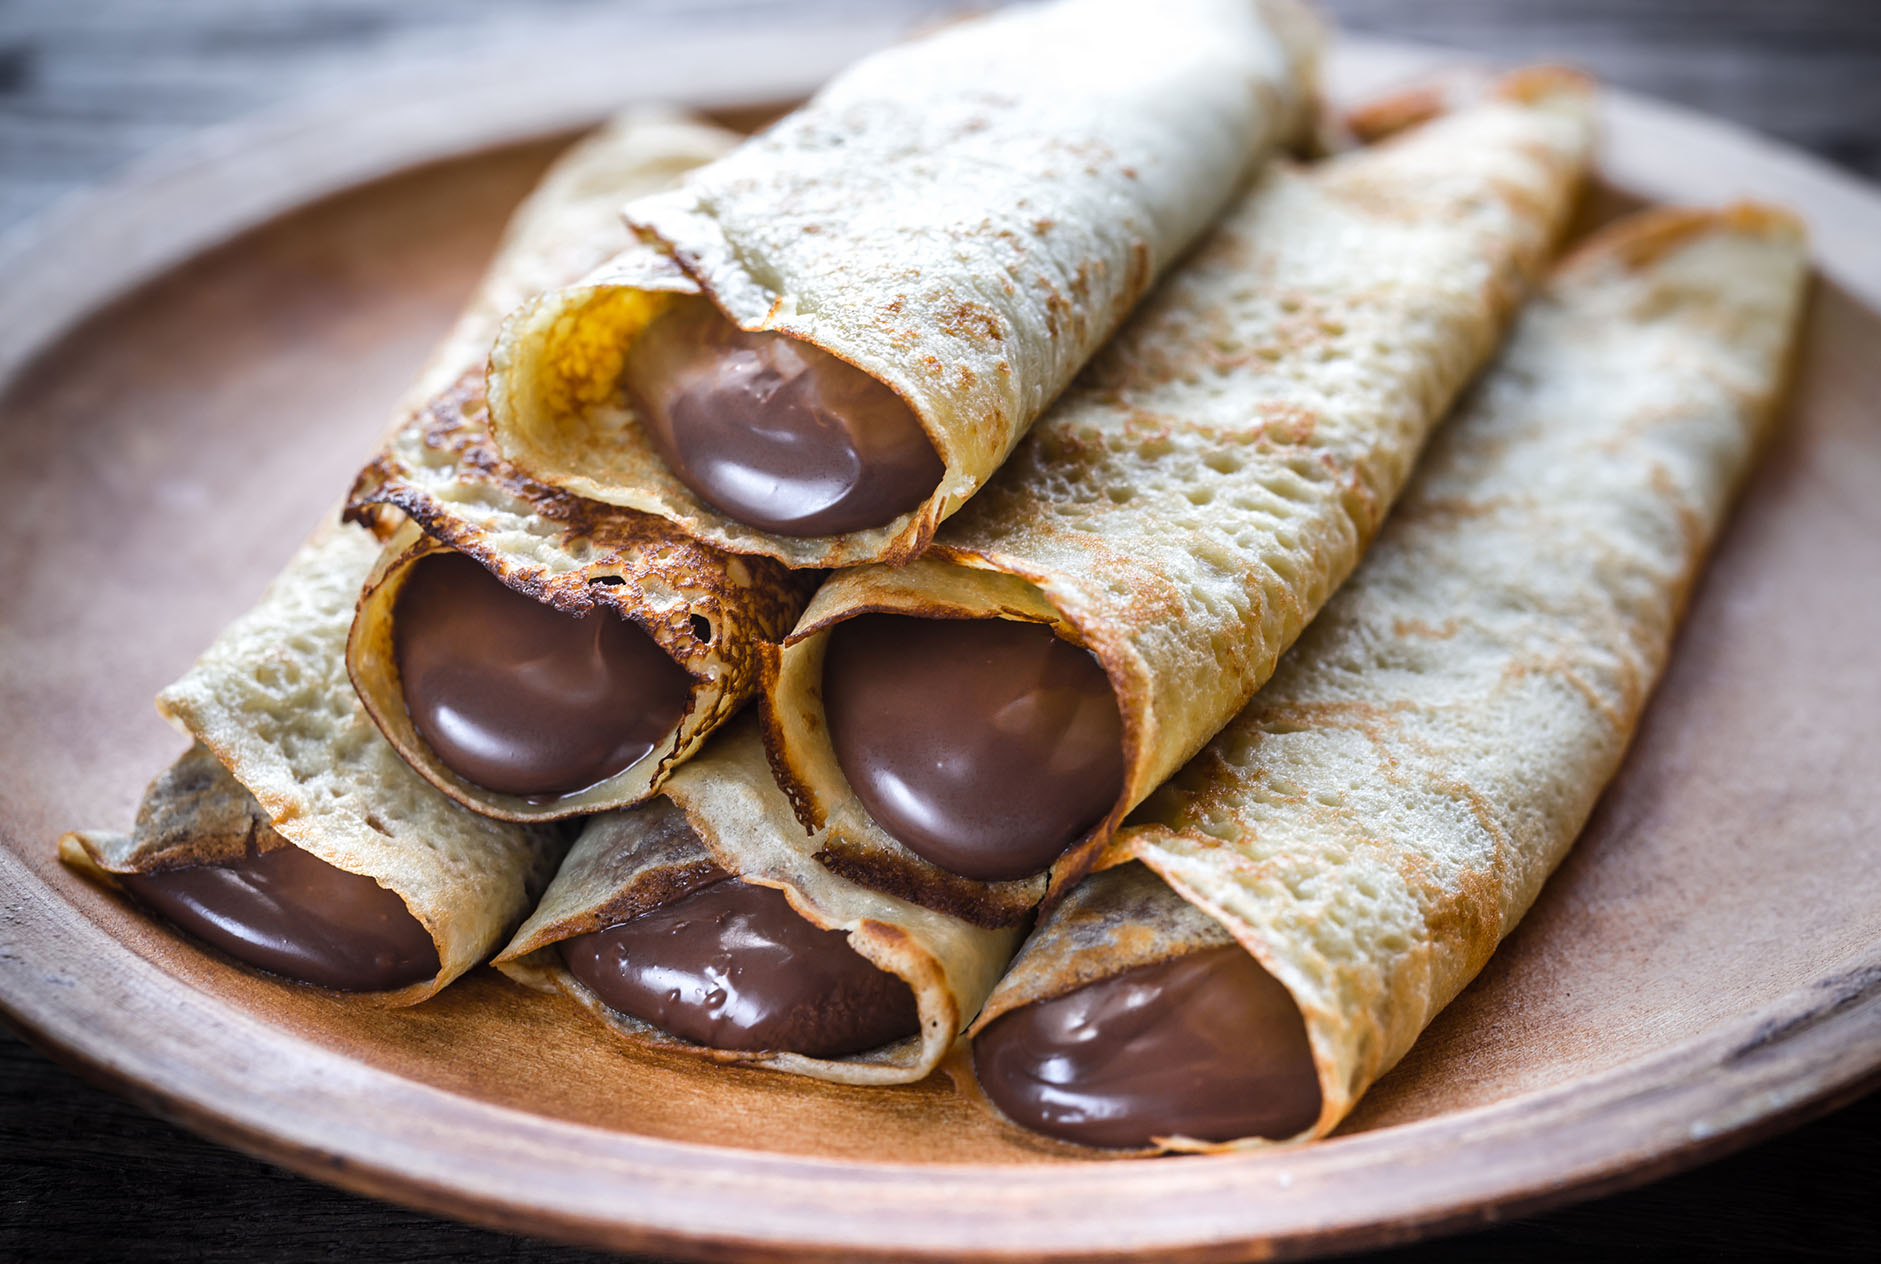 Chocolate Almondmilk Pudding Filled Crepes – Lakeview Farms